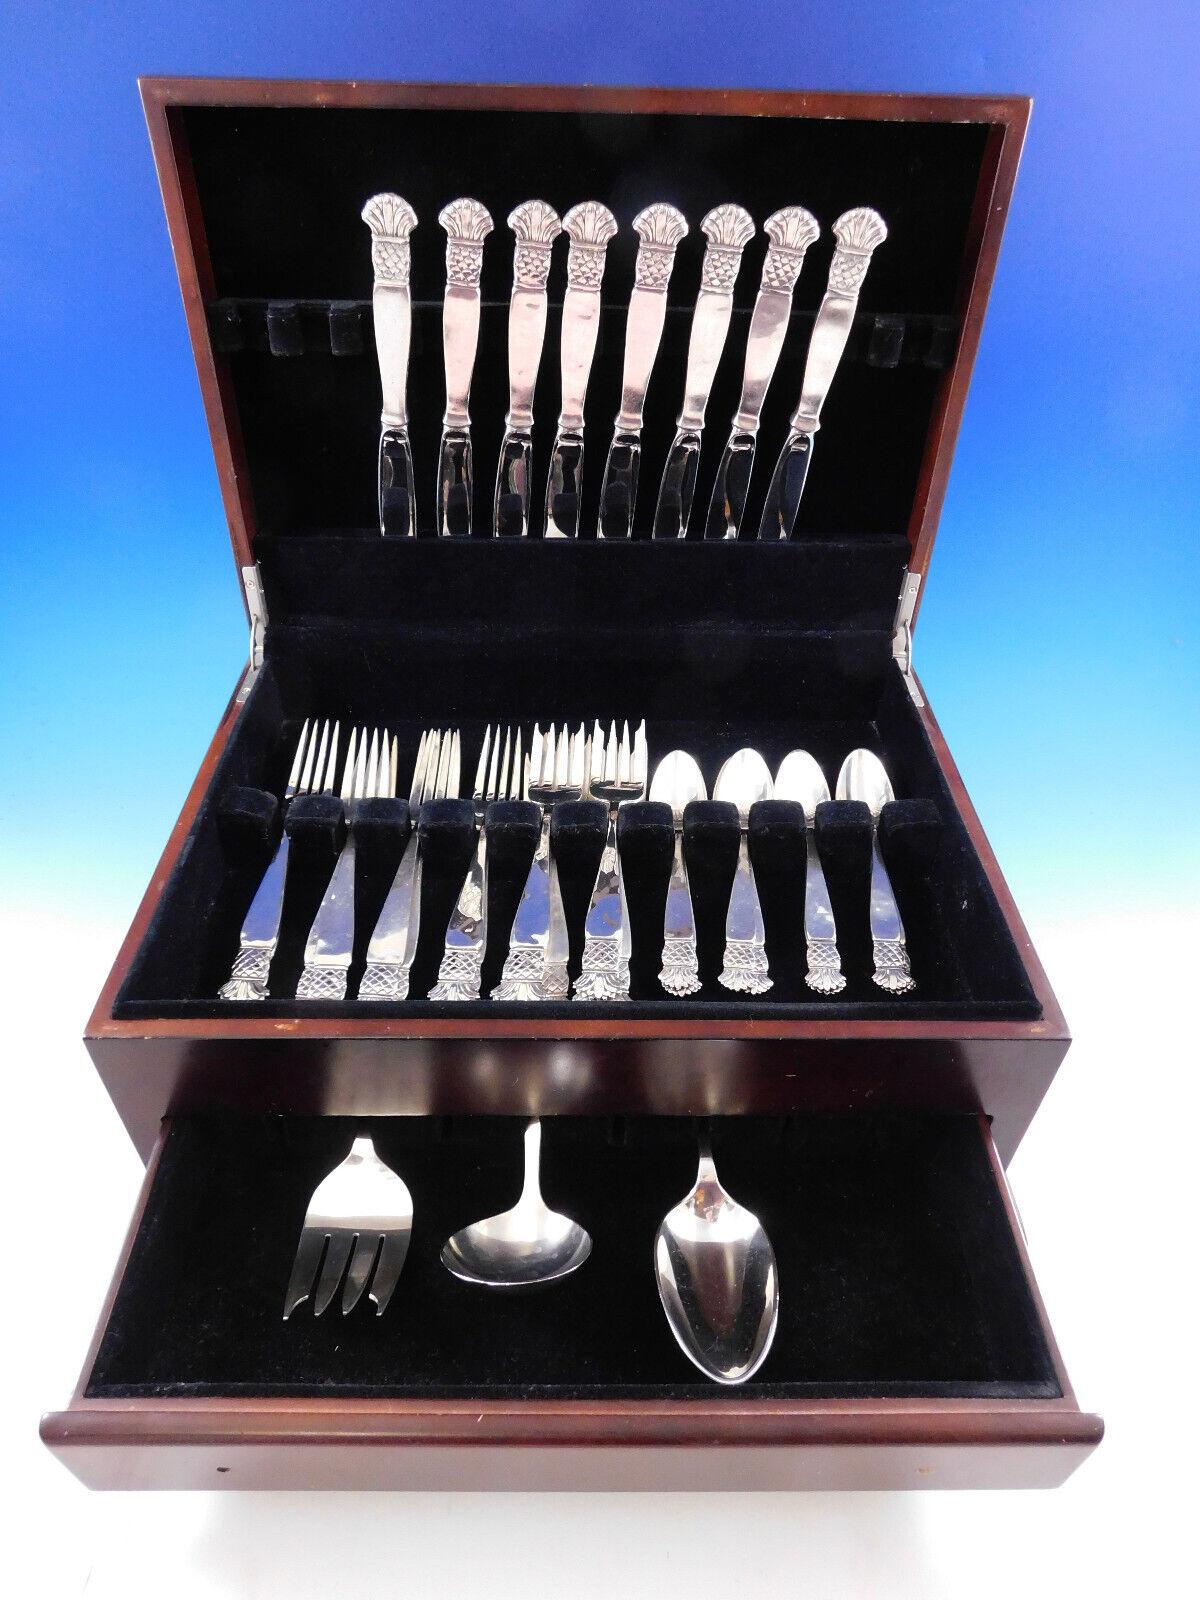 Old Newbury Crafters silver is genuinely hand-made and wonderfully heavy, the machine cannot match the quality, durability, look and feel of handmade silver. The subtle hammered finish shows silver at its finest. 


Superb 35 piece sterling